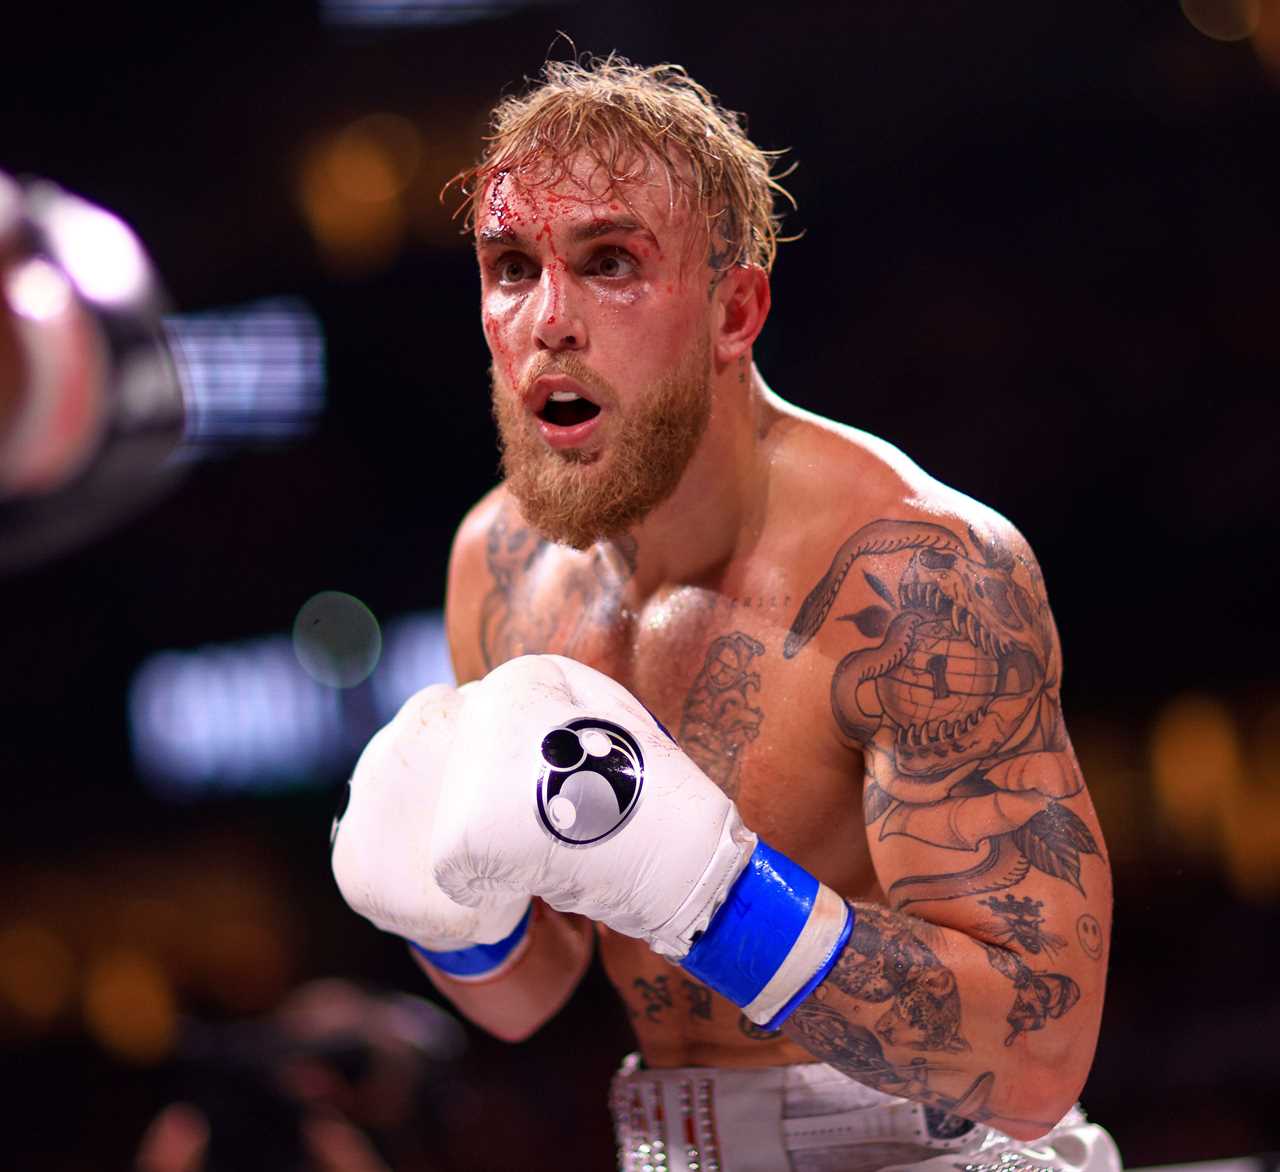 Jake Paul's next opponent: Conor McGregor, KSI and others are expected to fight YouTubers after Tommy Fury denies entry to the USA